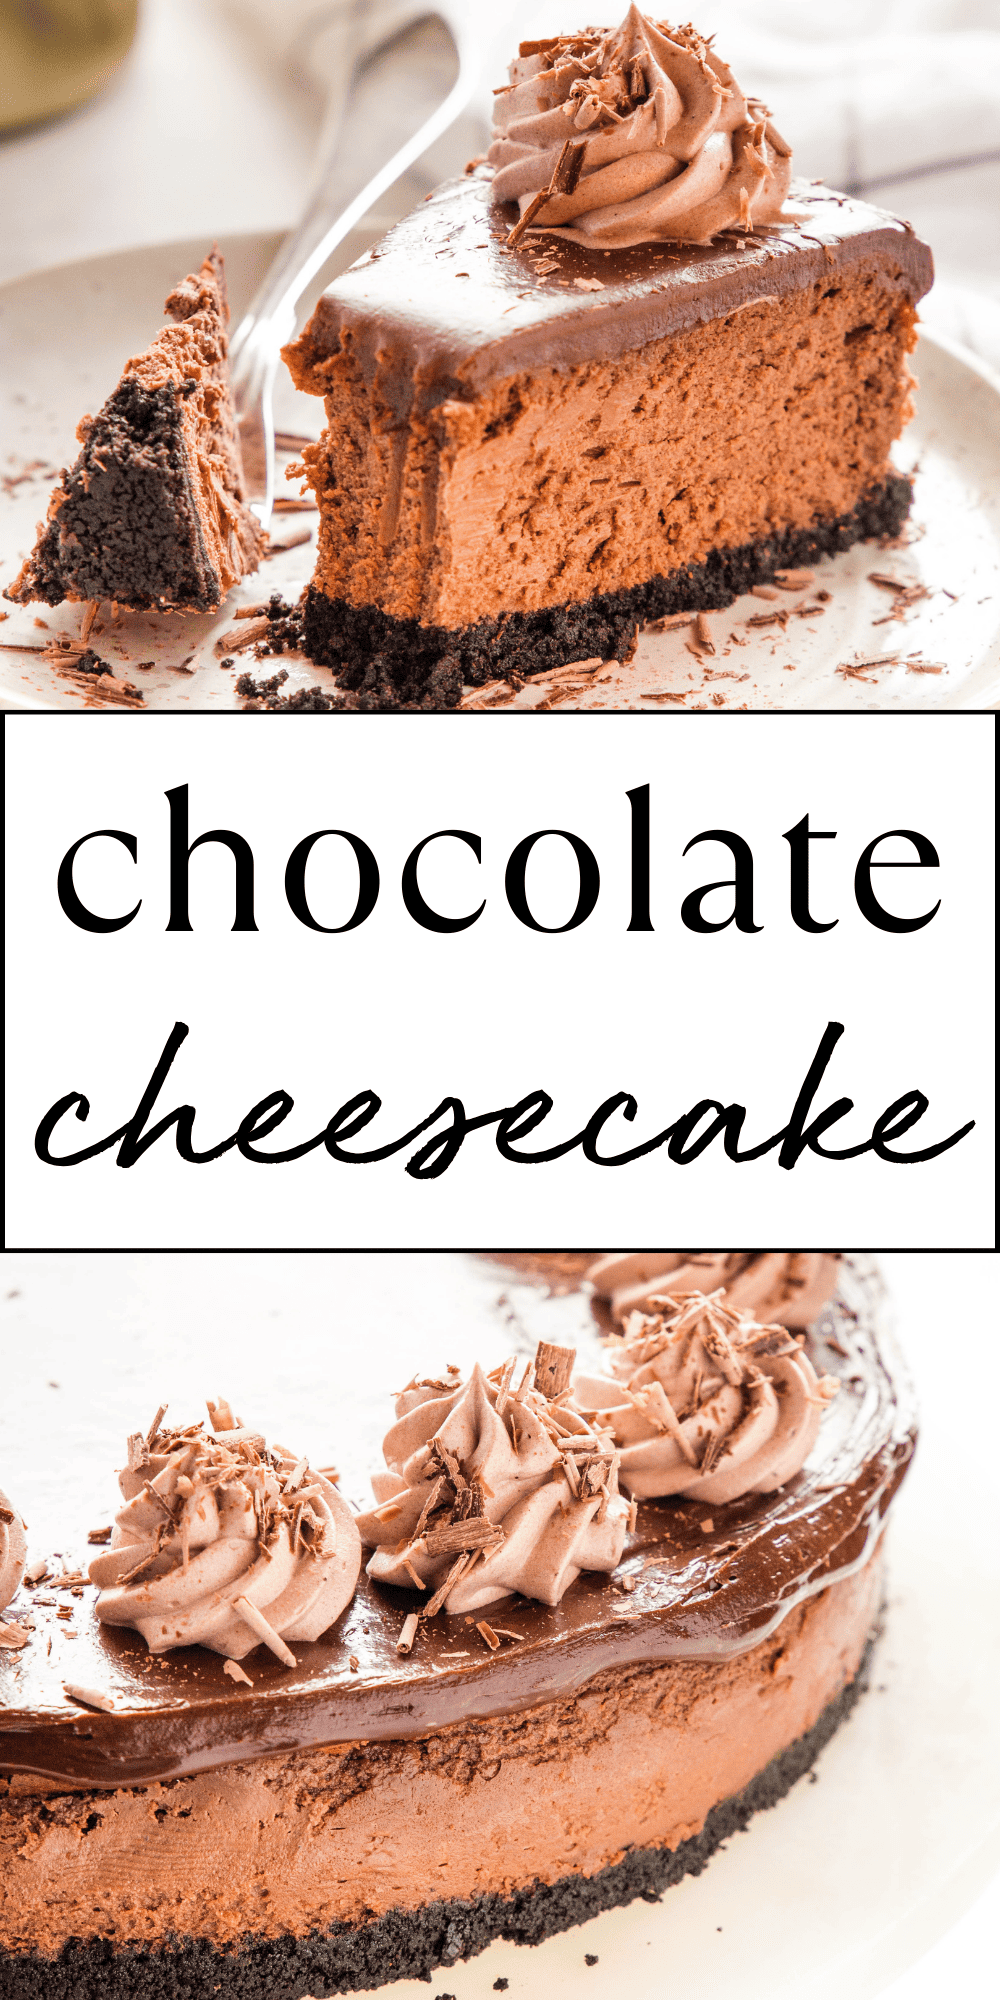 This Chocolate Cheesecake is a deliciously creamy and indulgent dessert with a chocolate cookie crust and topped with a decadent chocolate ganache. The PERFECT homemade chocolate cheesecake, no water bath required, and easy to make with our pro tips, tricks and secrets! Recipe from thebusybaker.ca! #chocolatecheesecake #cheesecakerecipe #easycheesecakerecipe #chocolatecheesecakerecipe #chocolateganache #mochacheesecake #easychocolatecheesecake via @busybakerblog